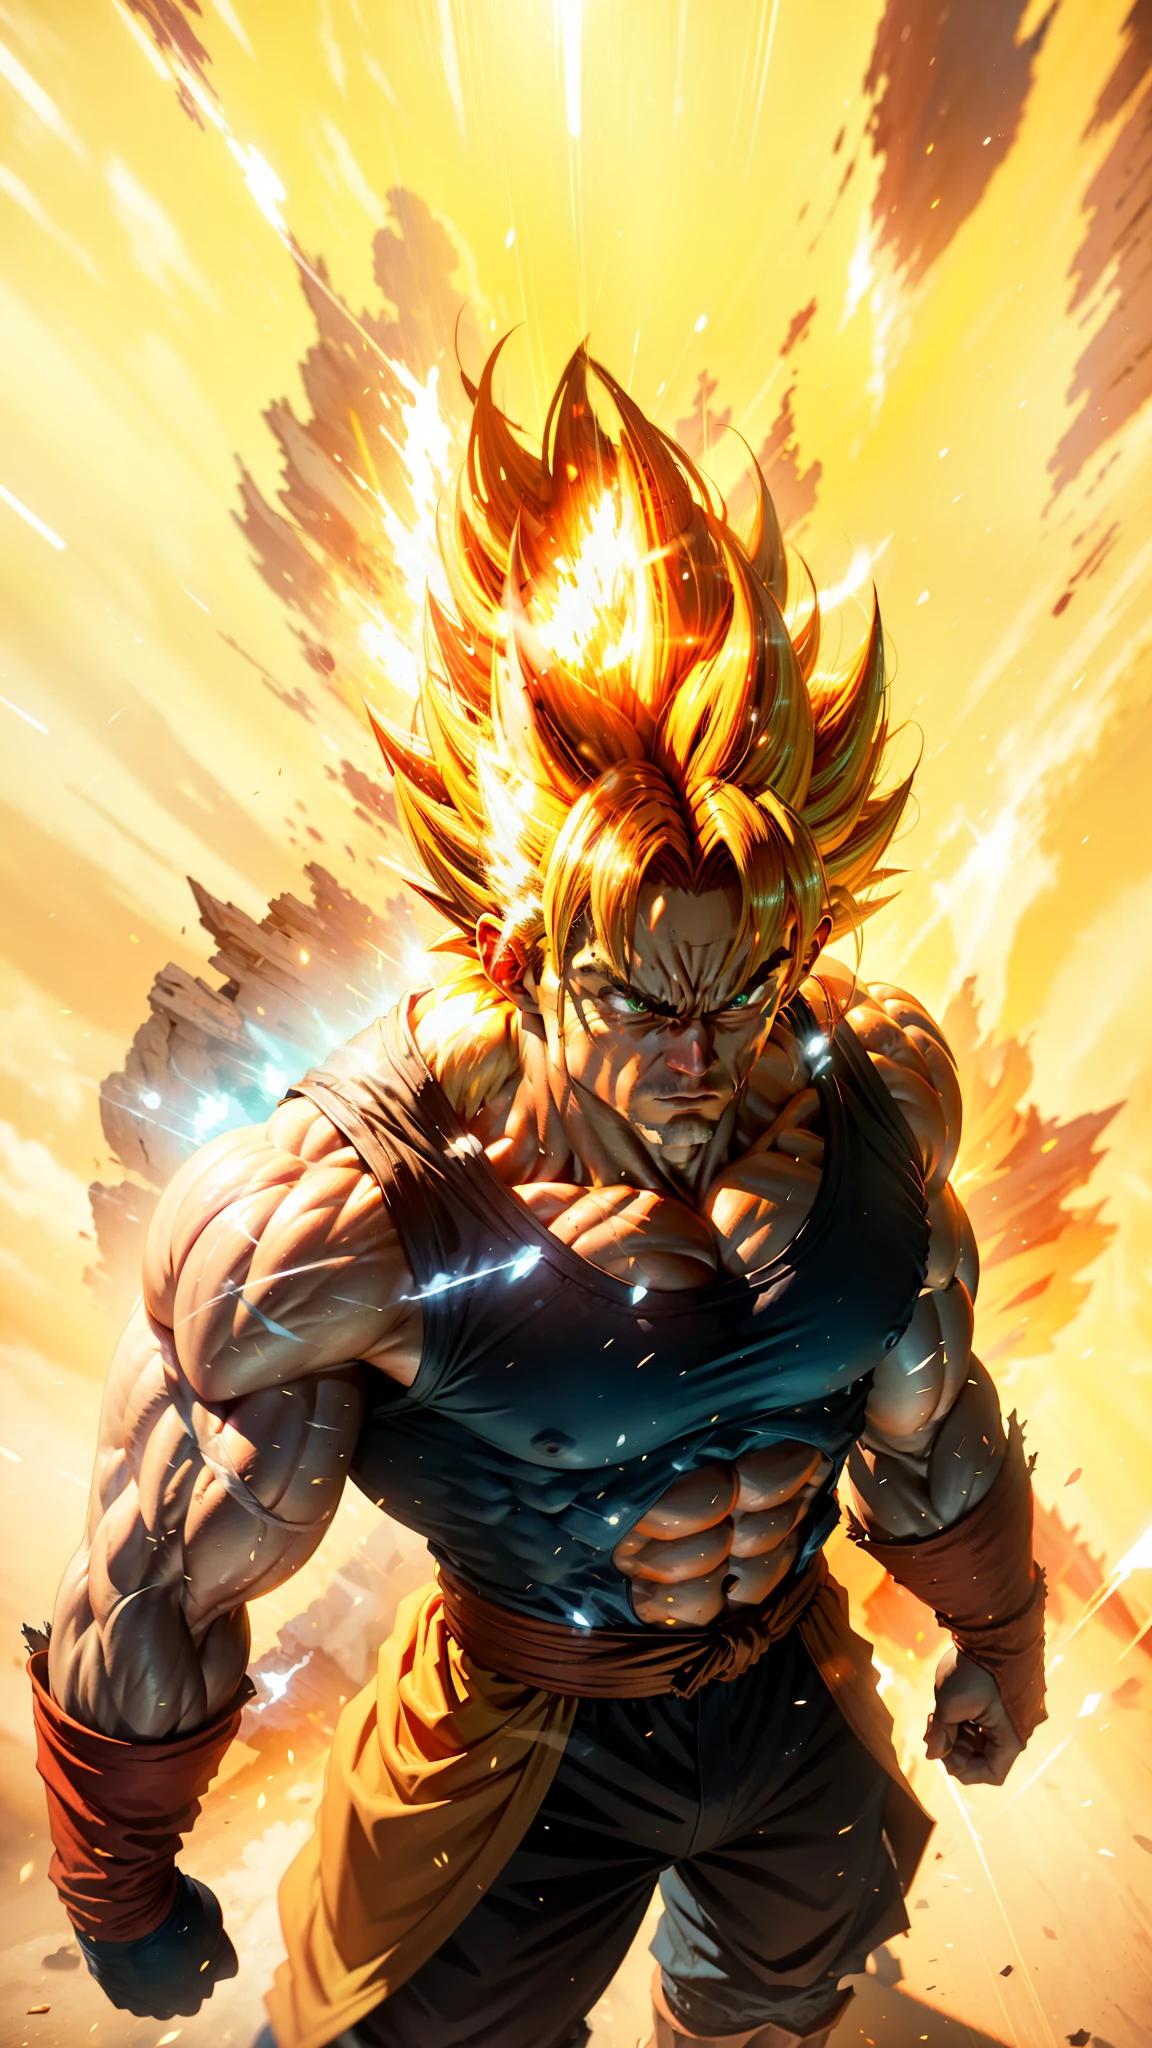 Goku super saiyan, Adult man with extremely muscular neon golden hair, defined muscles full of veins, dark blue colored vest, red gloves, serious face, muscle definition, large shoulders, rounded biceps, unreal engine 5.8k.